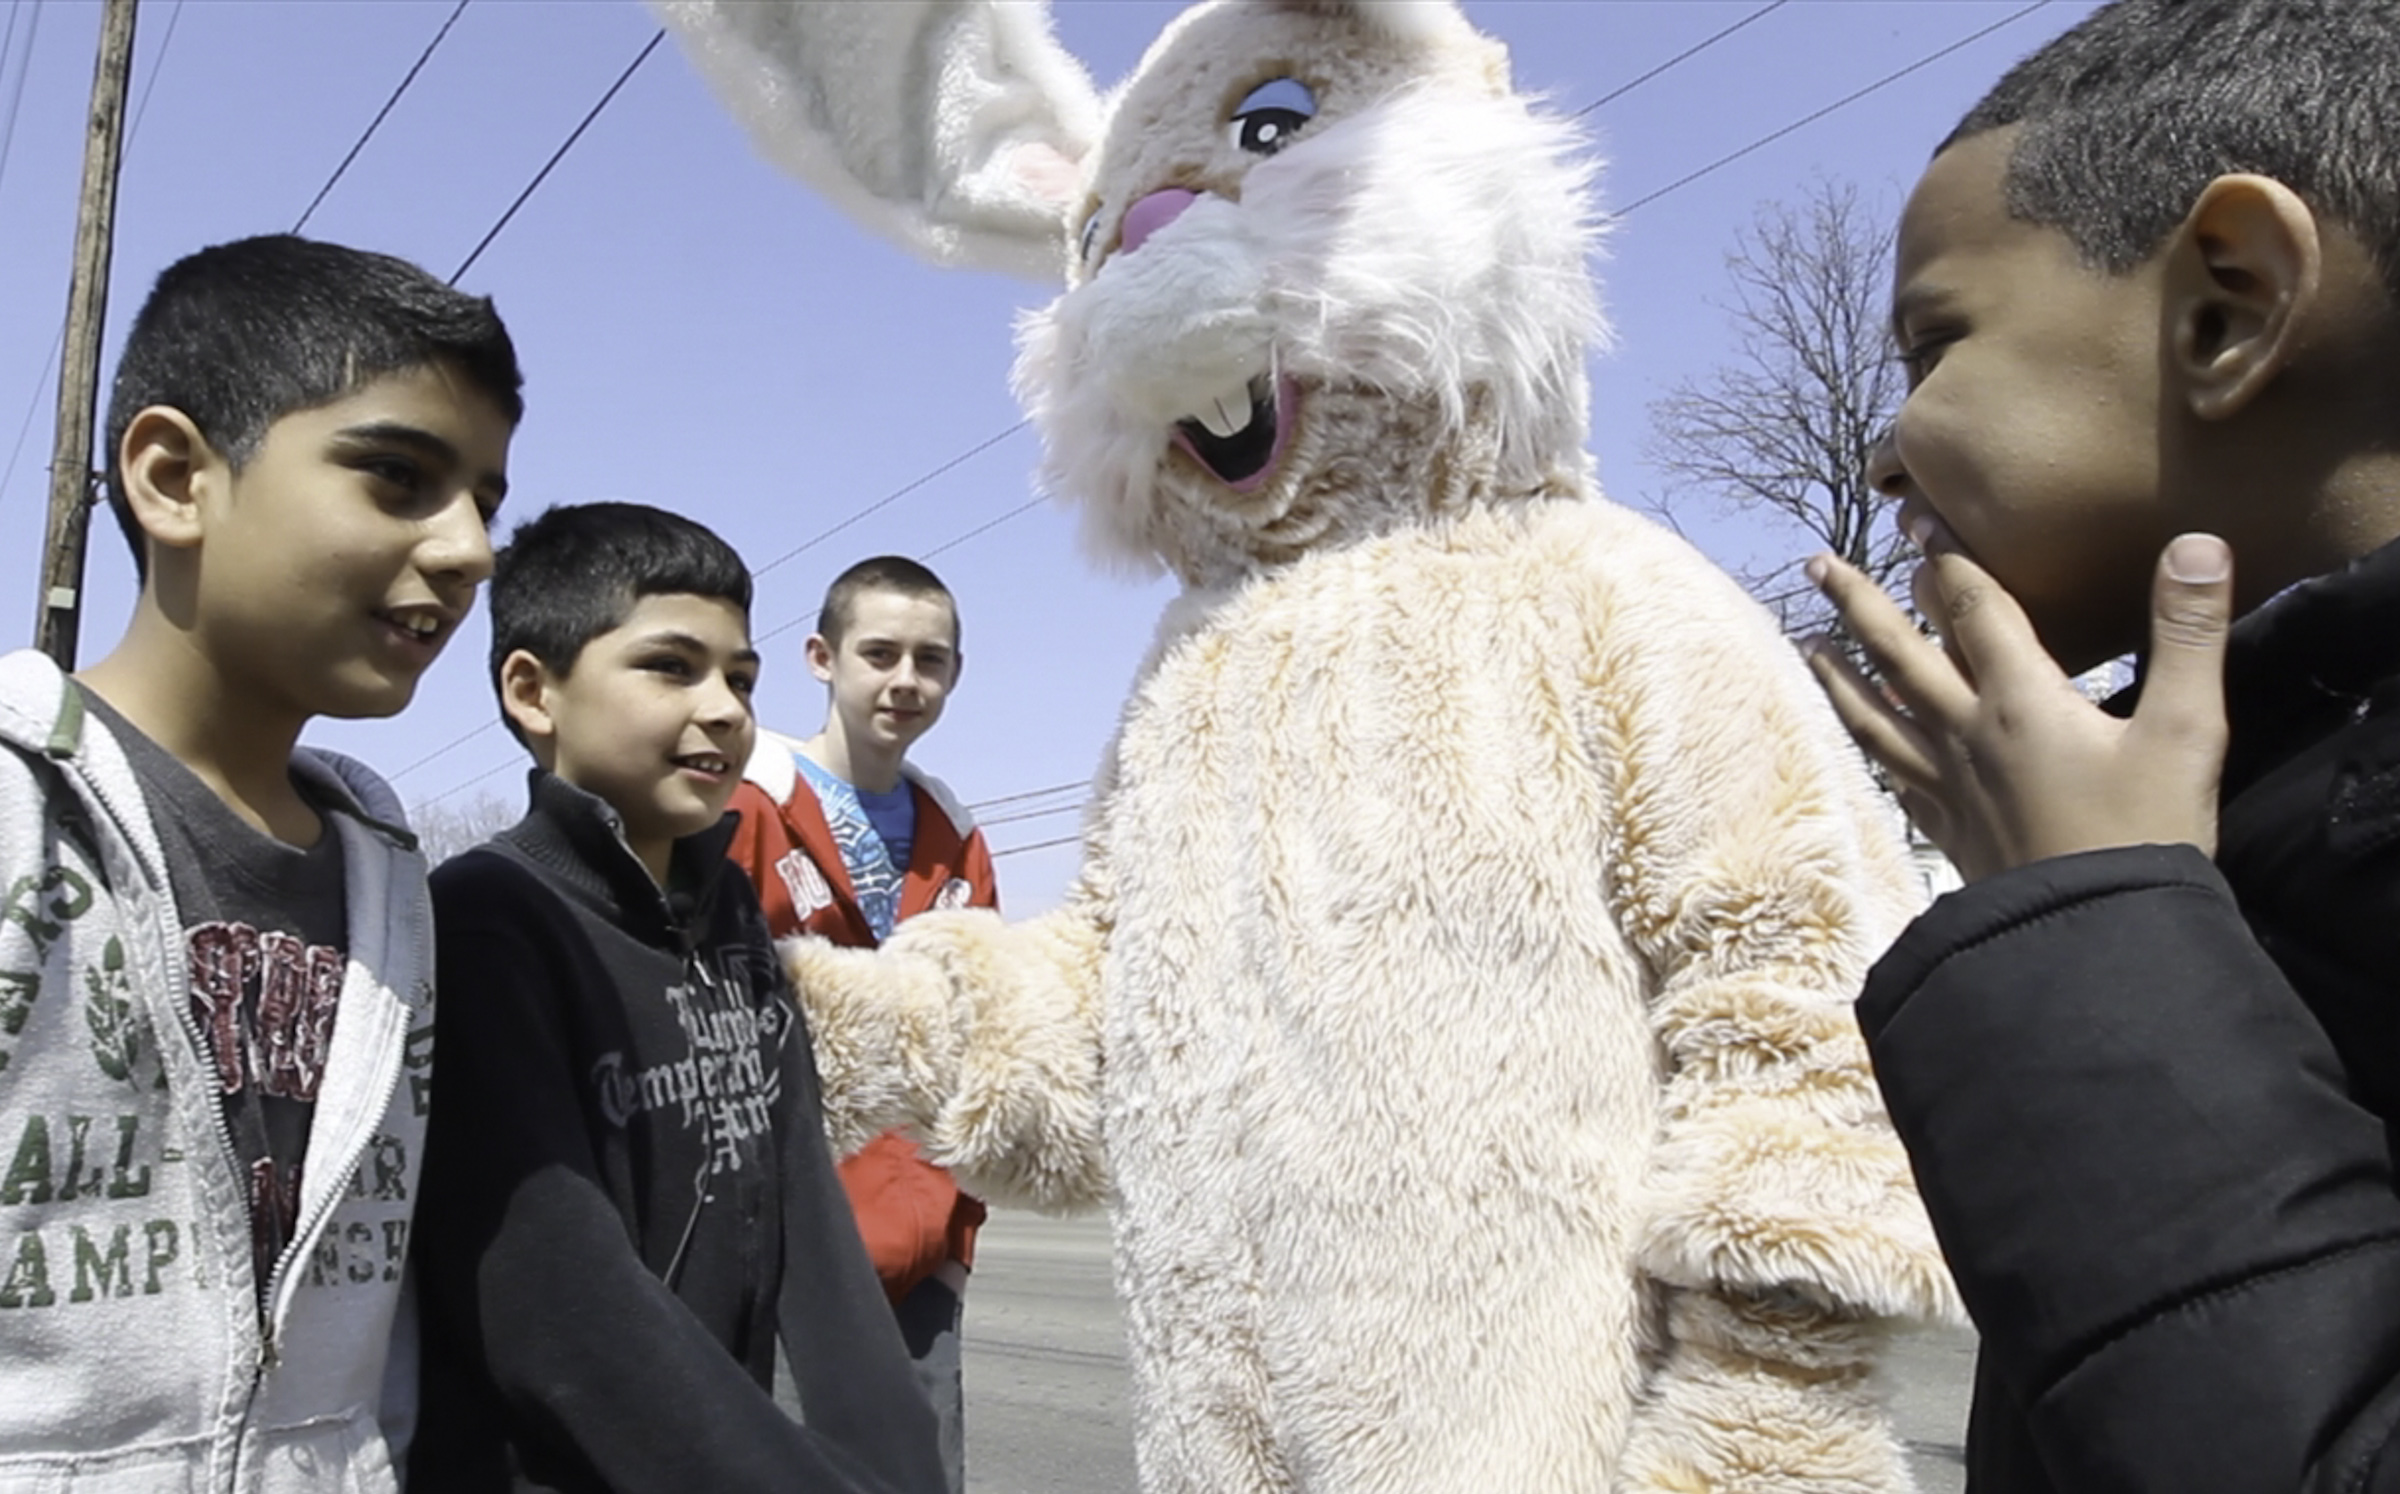 Where to see the Easter Bunny near Dayton, Ohio